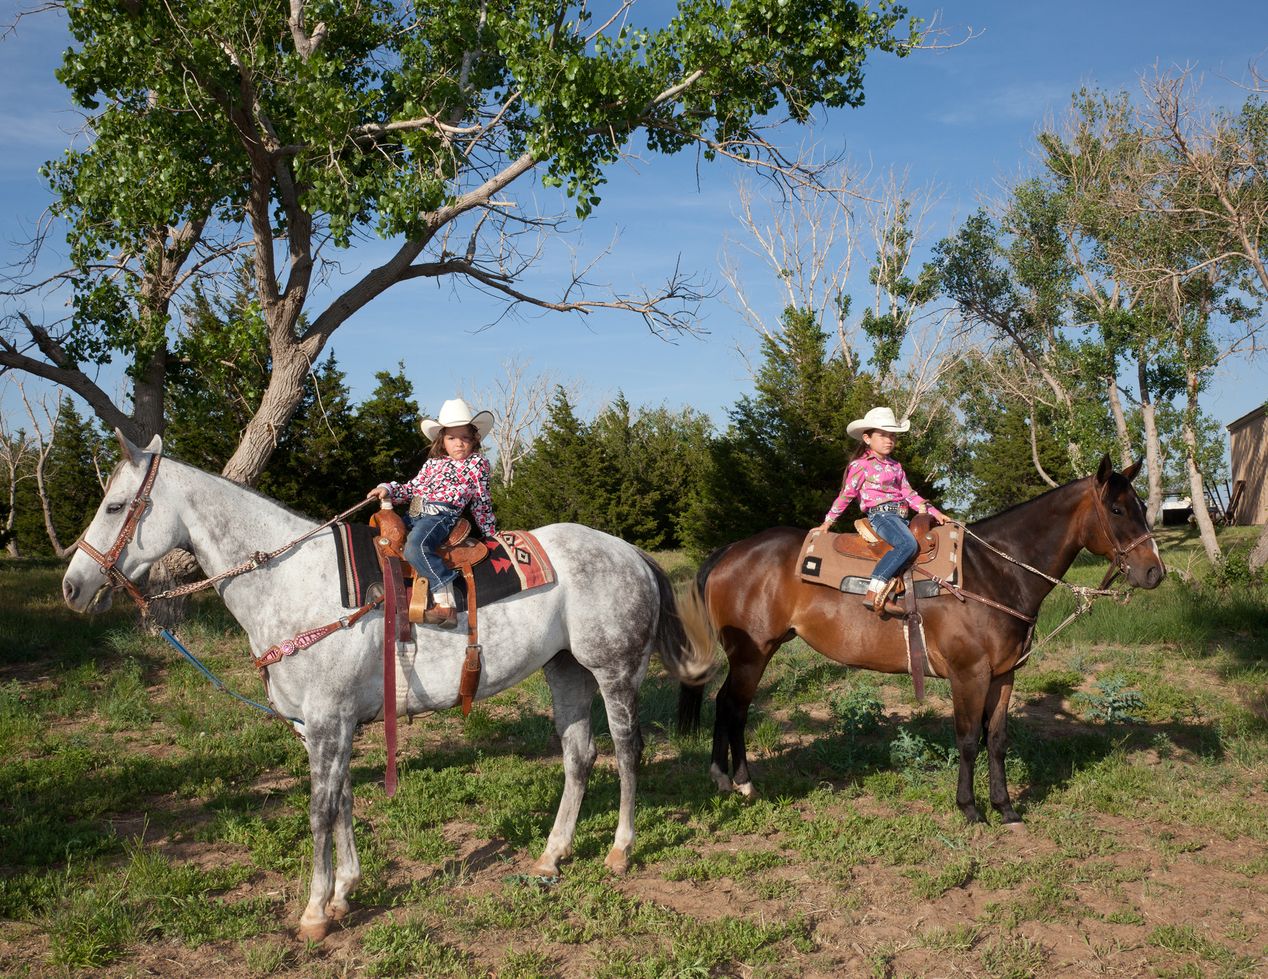 Two young cowgirls on their horses, environmental portrait photography, Ilona Szwarc, contemporary Los Angeles artist.